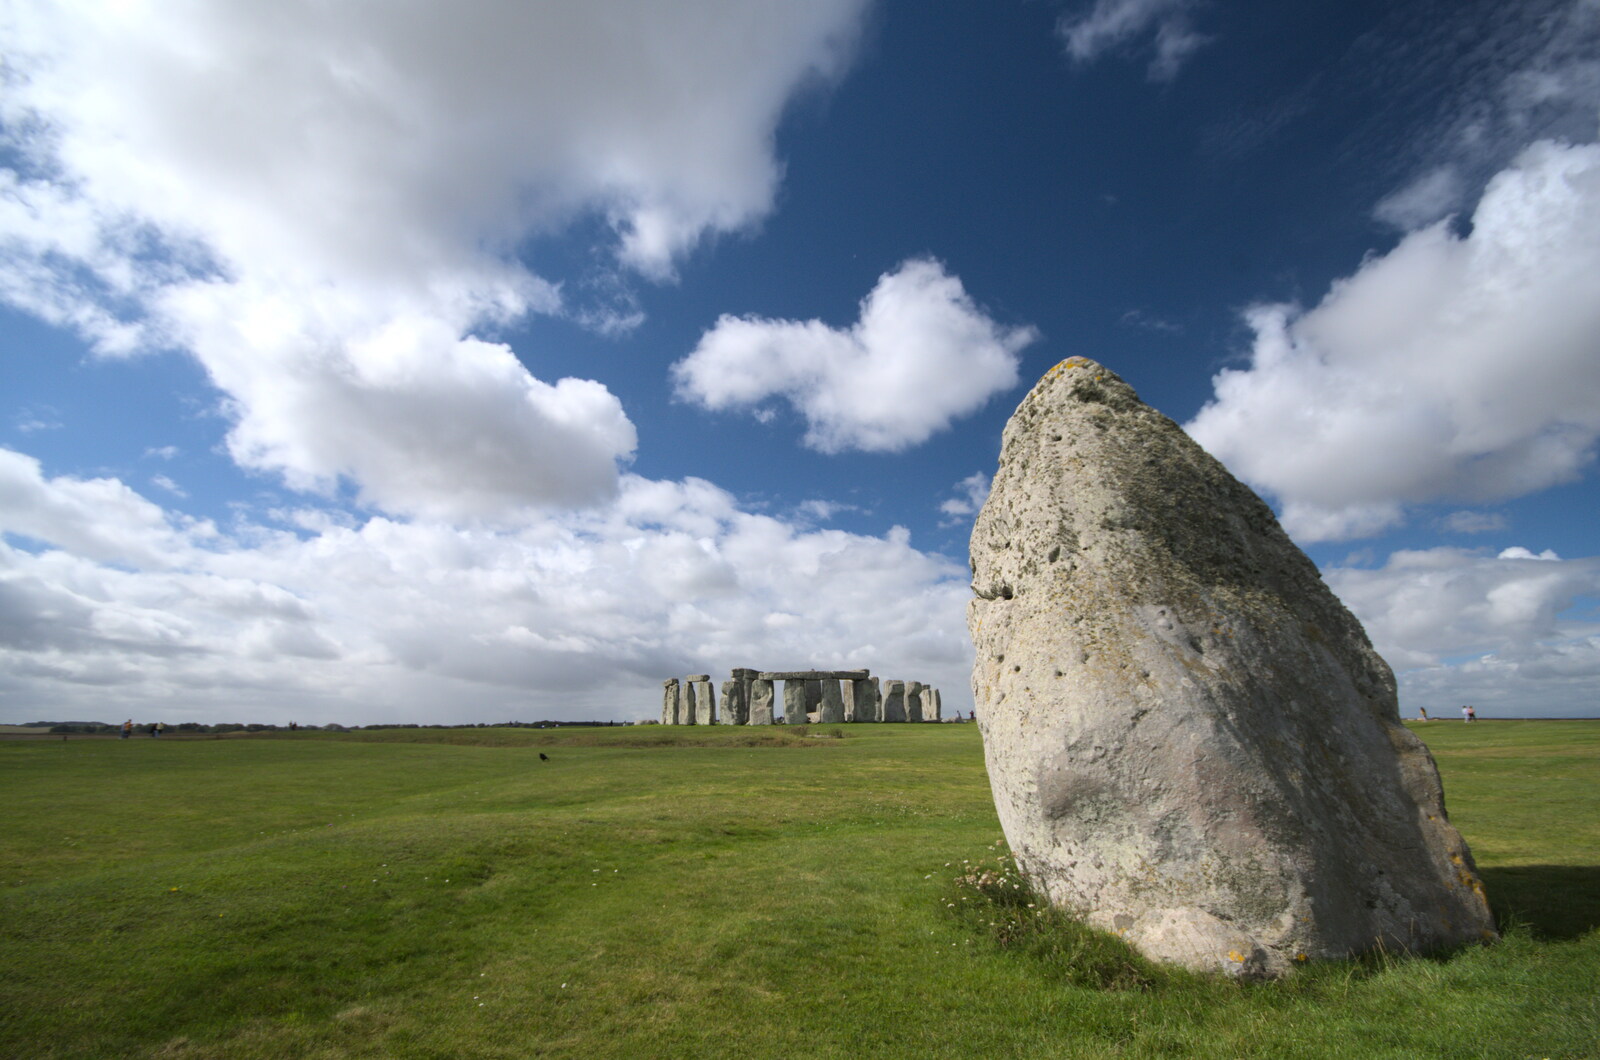 The heel stone from Stone Circles: Stonehenge and Avebury, Wiltshire - 22nd August 2020